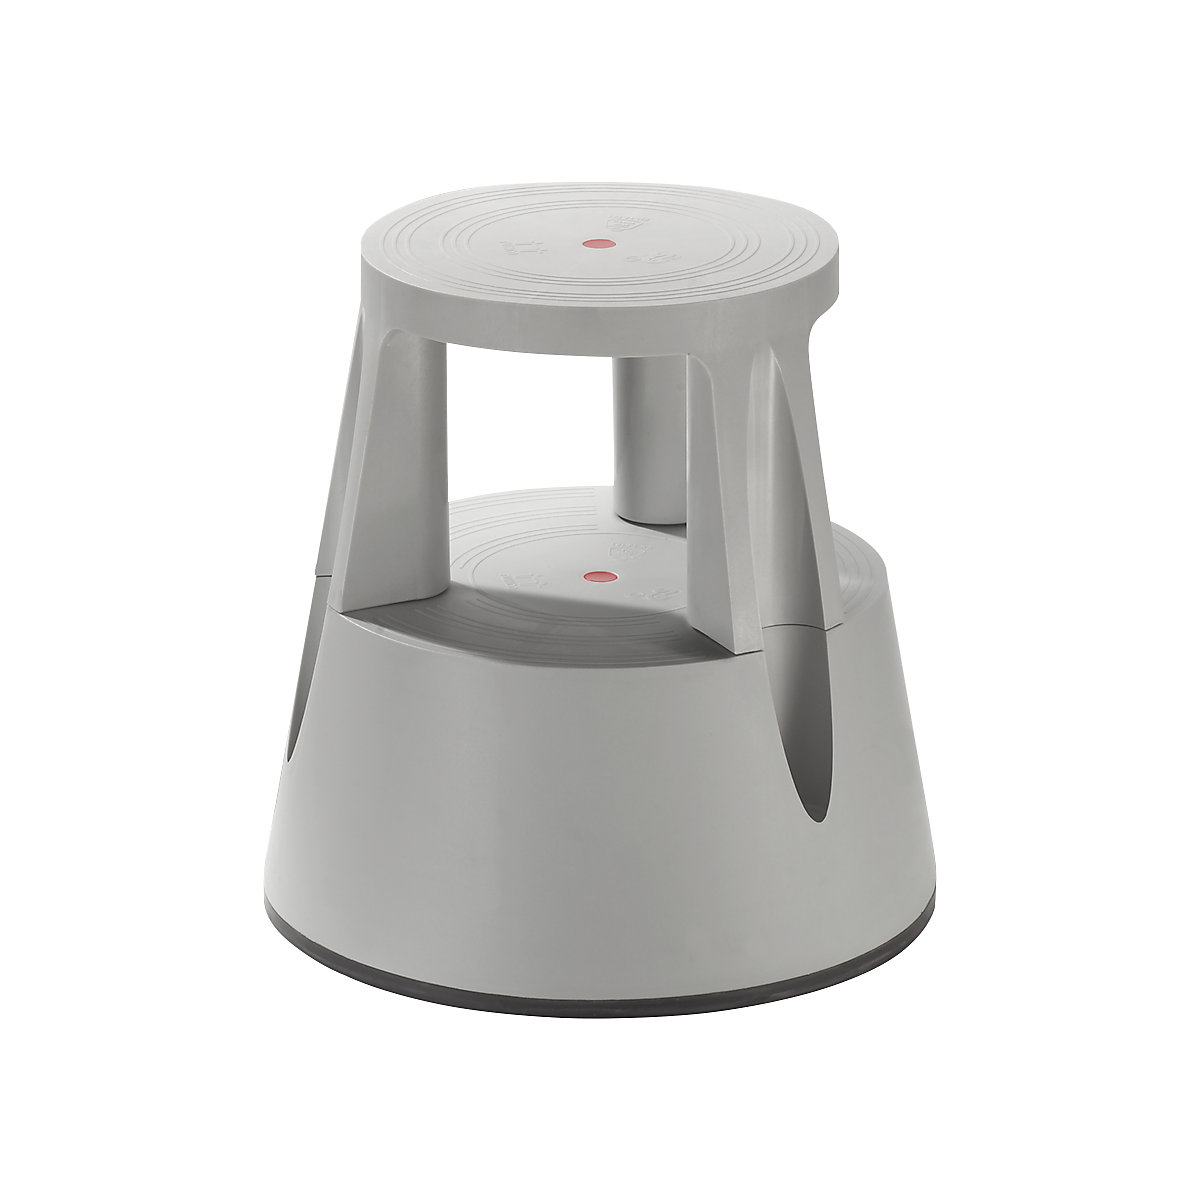 Kick stool made of shatterproof plastic – Twinco, max. load 150 kg, height under load 410 mm, grey-4